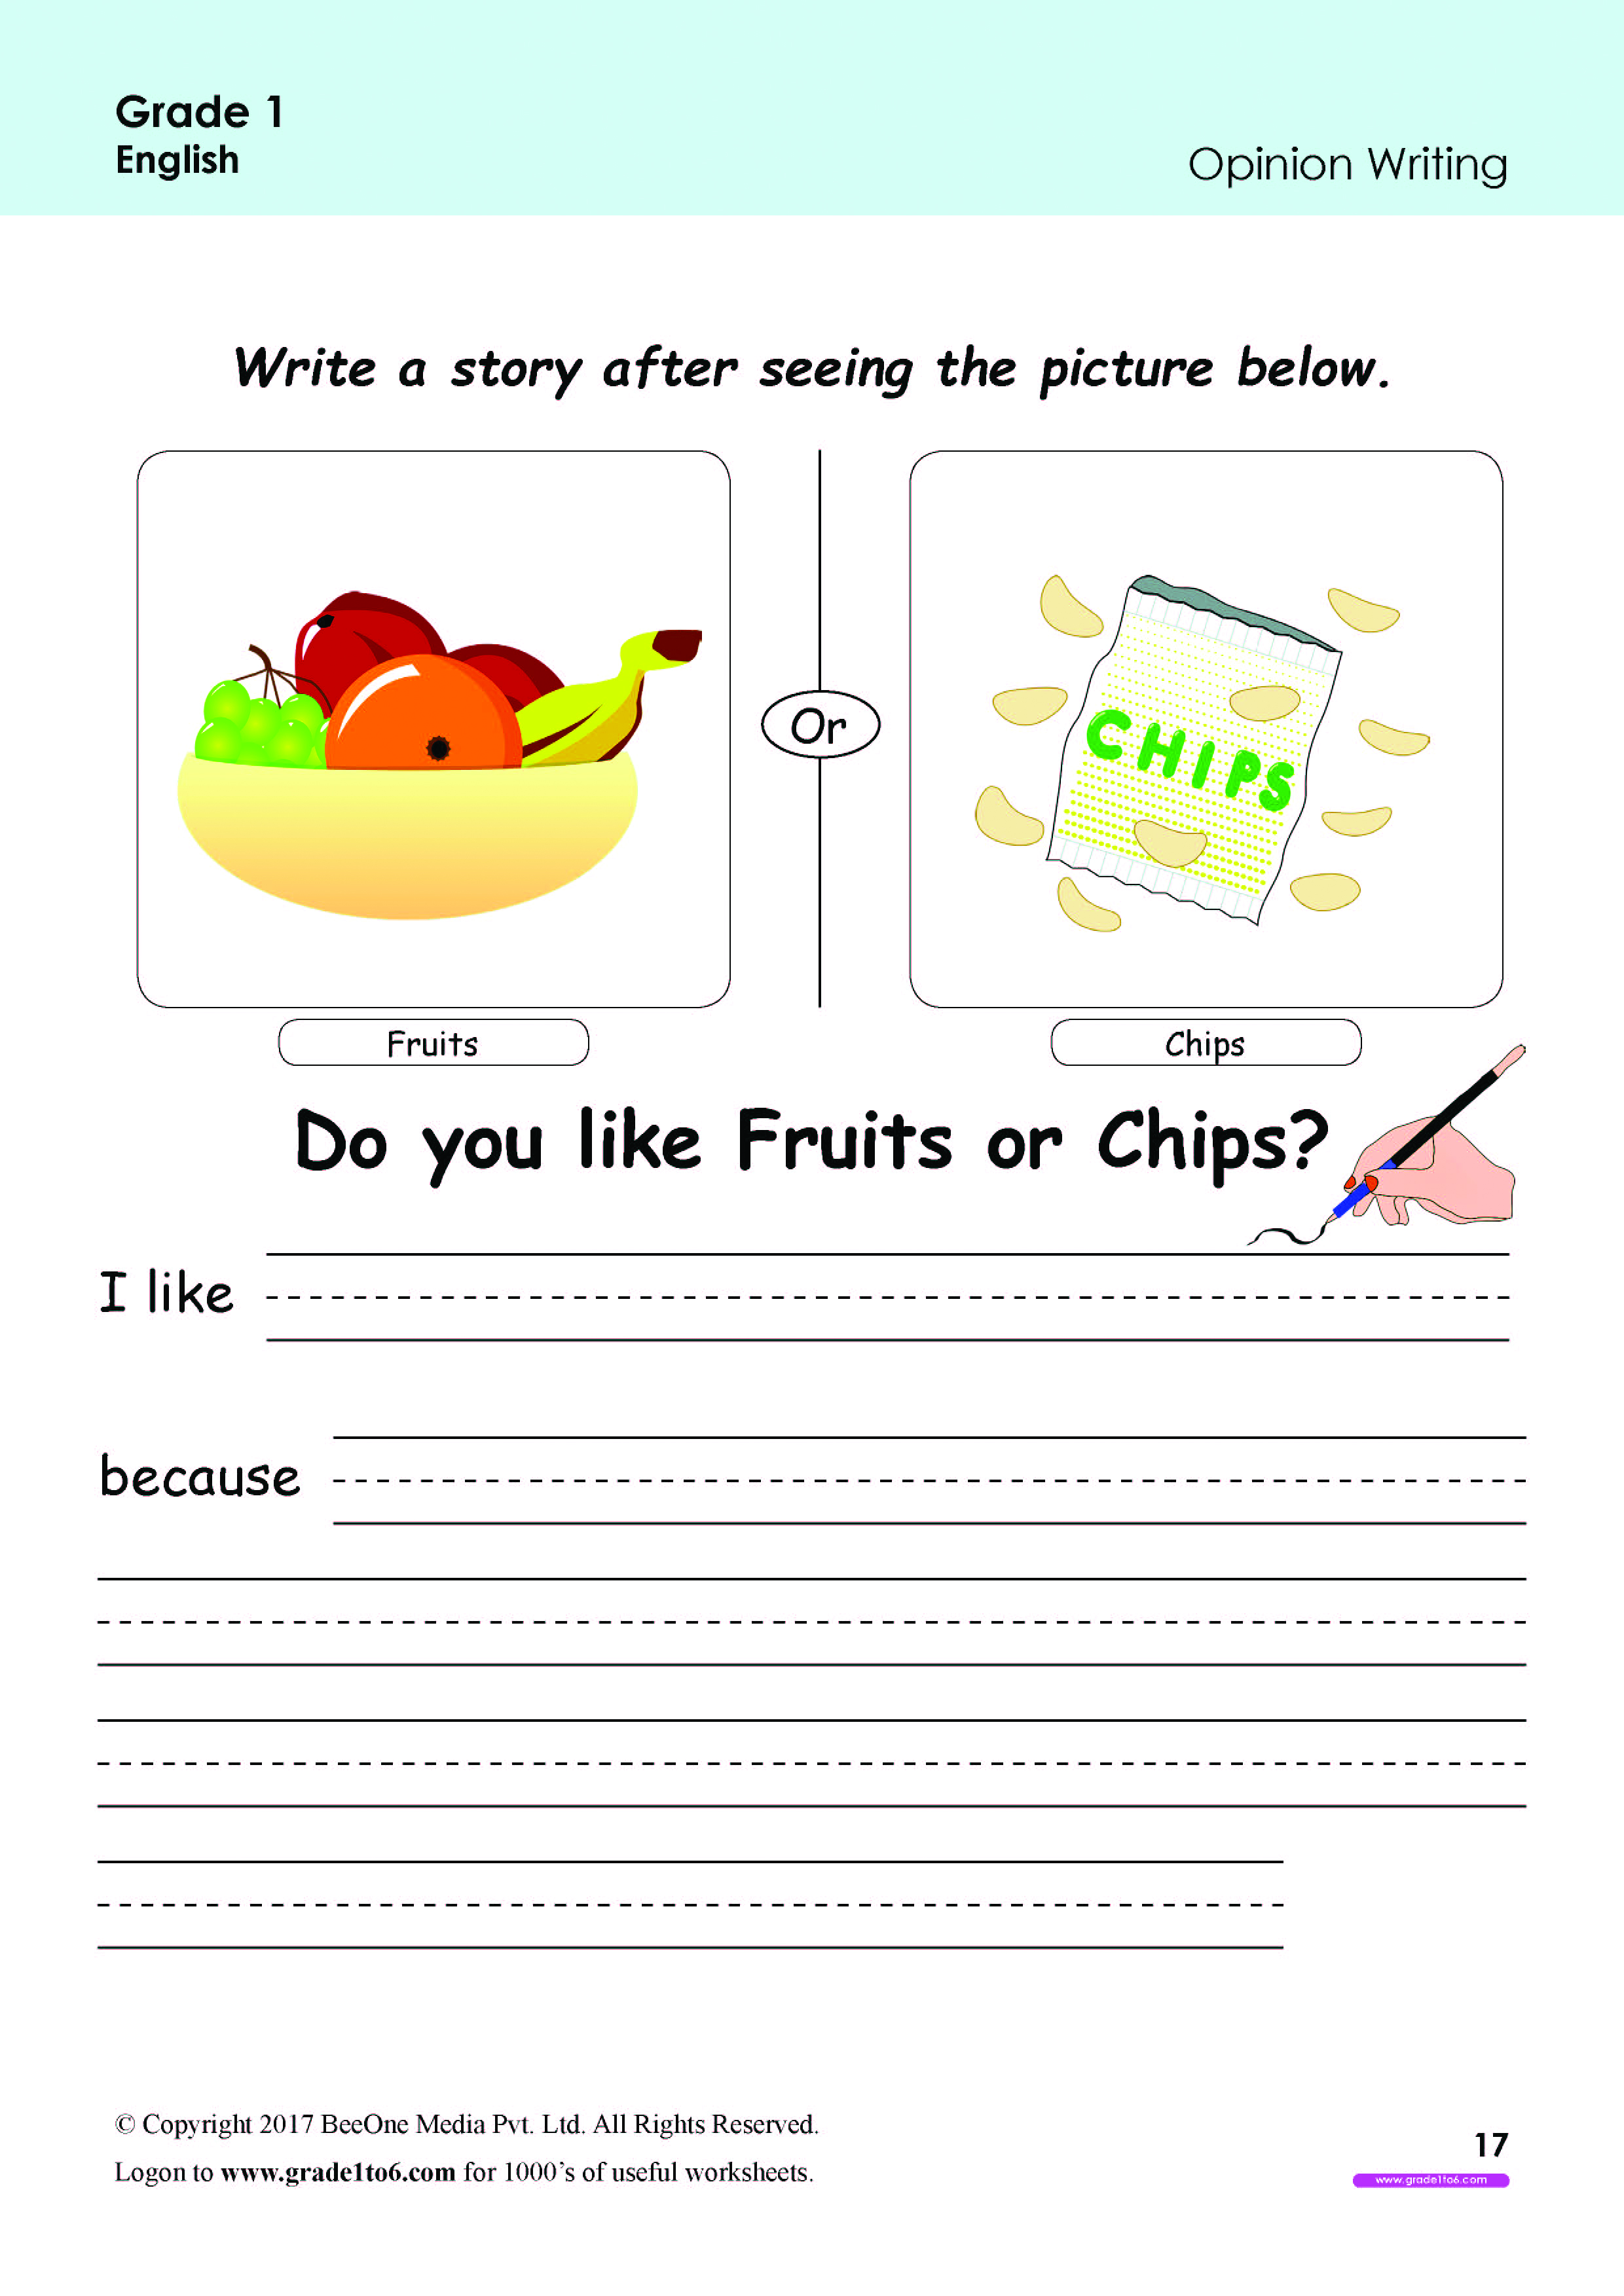 opinion writing worksheets for grade 1 www grade1to6 com